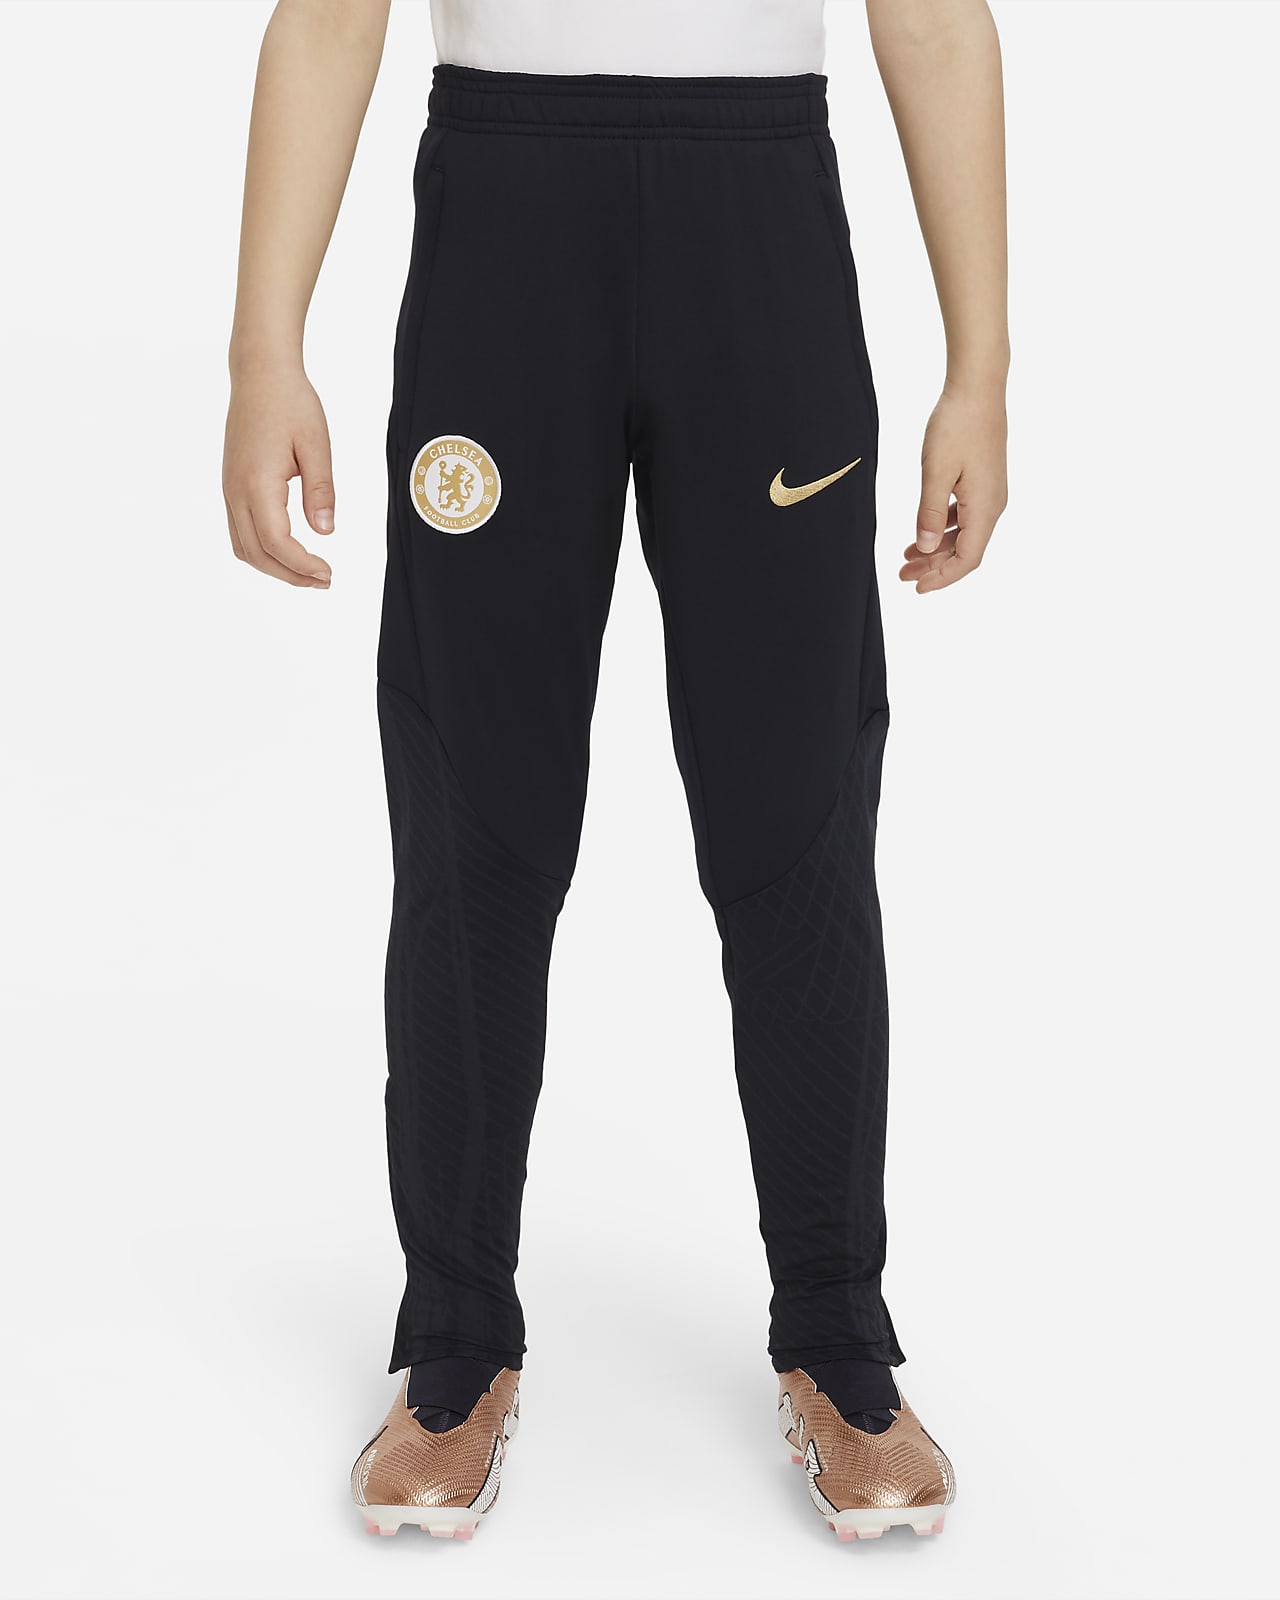 The Best Nike Soccer Apparel and Gear for Cold Weather Nikecom